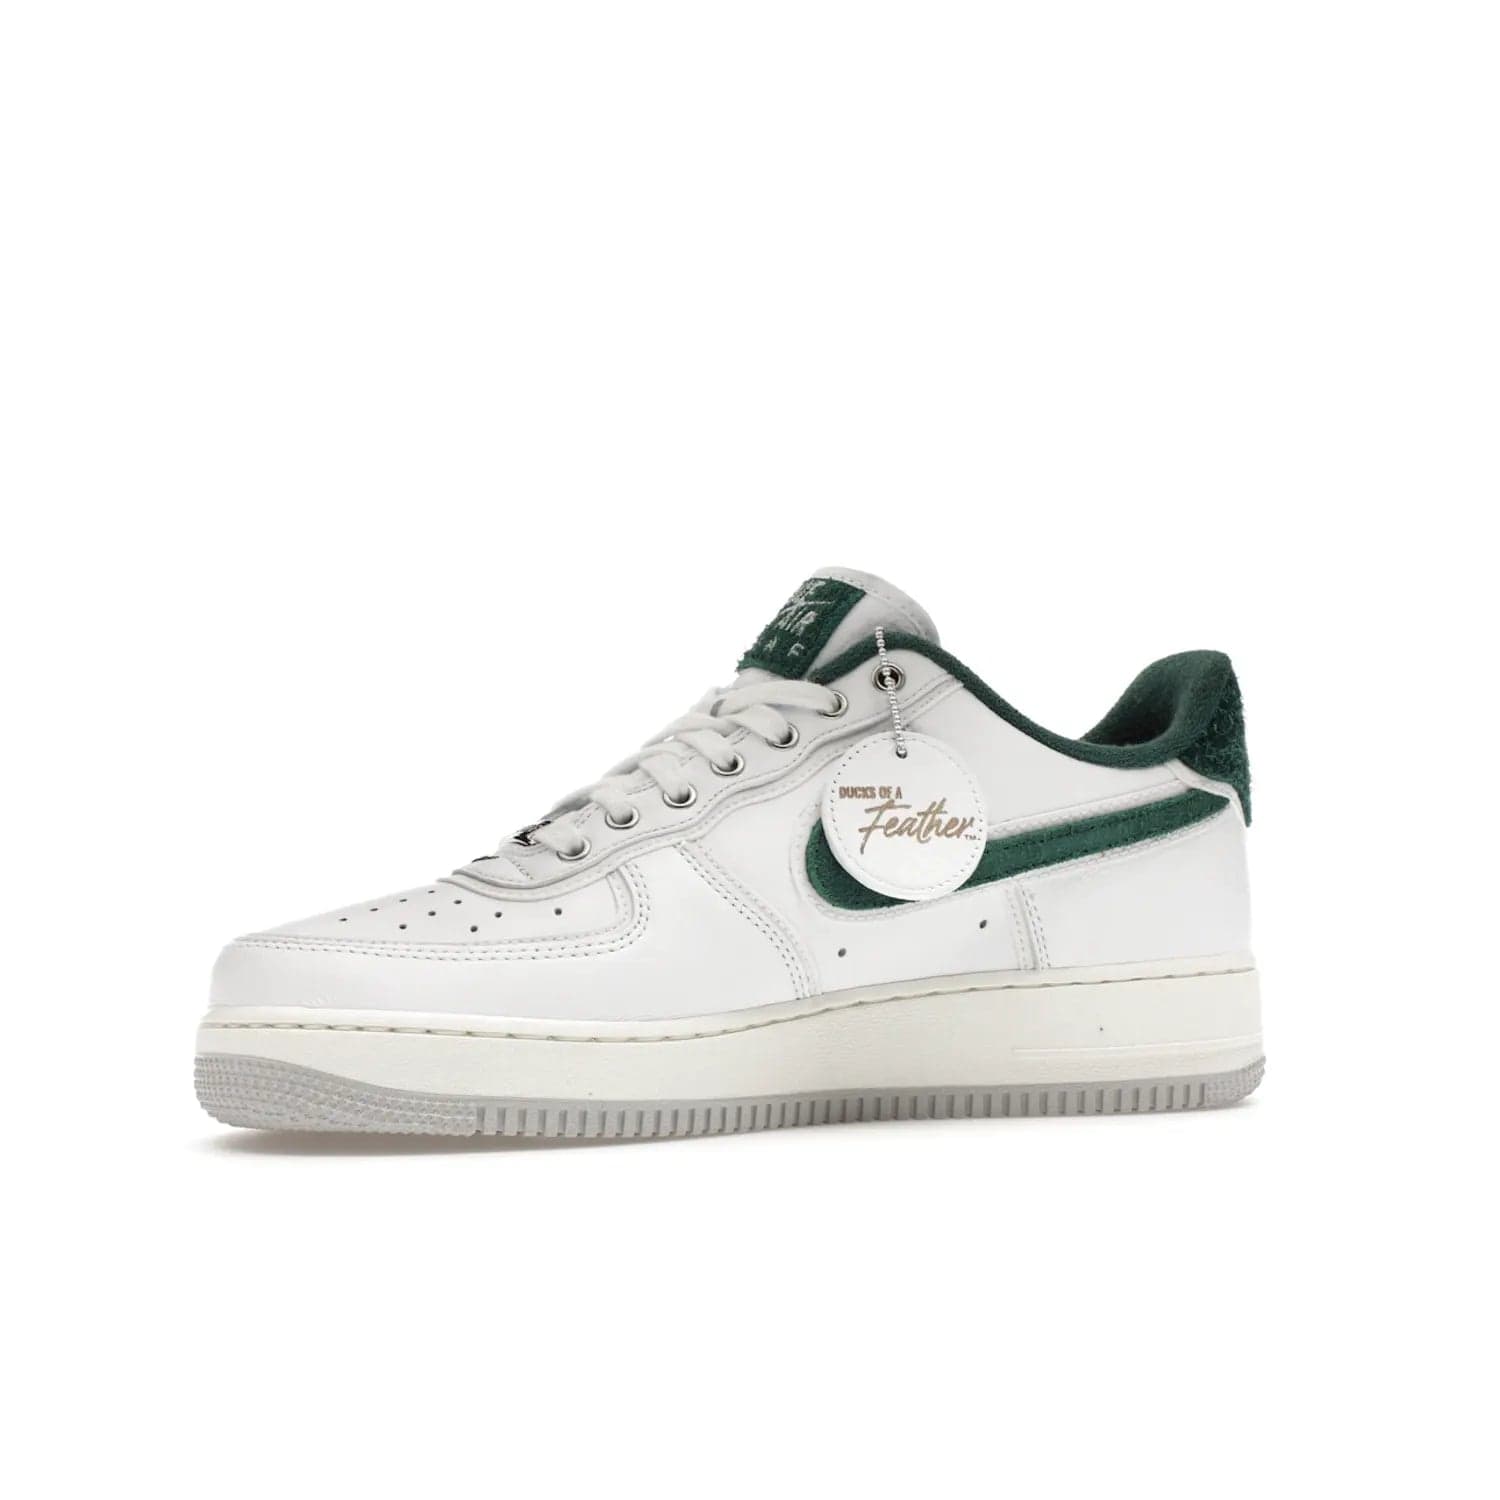 Nike Air Force 1 Low '07 Premium University of Oregon PE - Image 17 - Only at www.BallersClubKickz.com - The Nike Air Force 1 Low '07 Premium. Special Oregon University colorway. White base with green and sail accents. Cushioned rubber midsole. Comfort and style. Support your school!